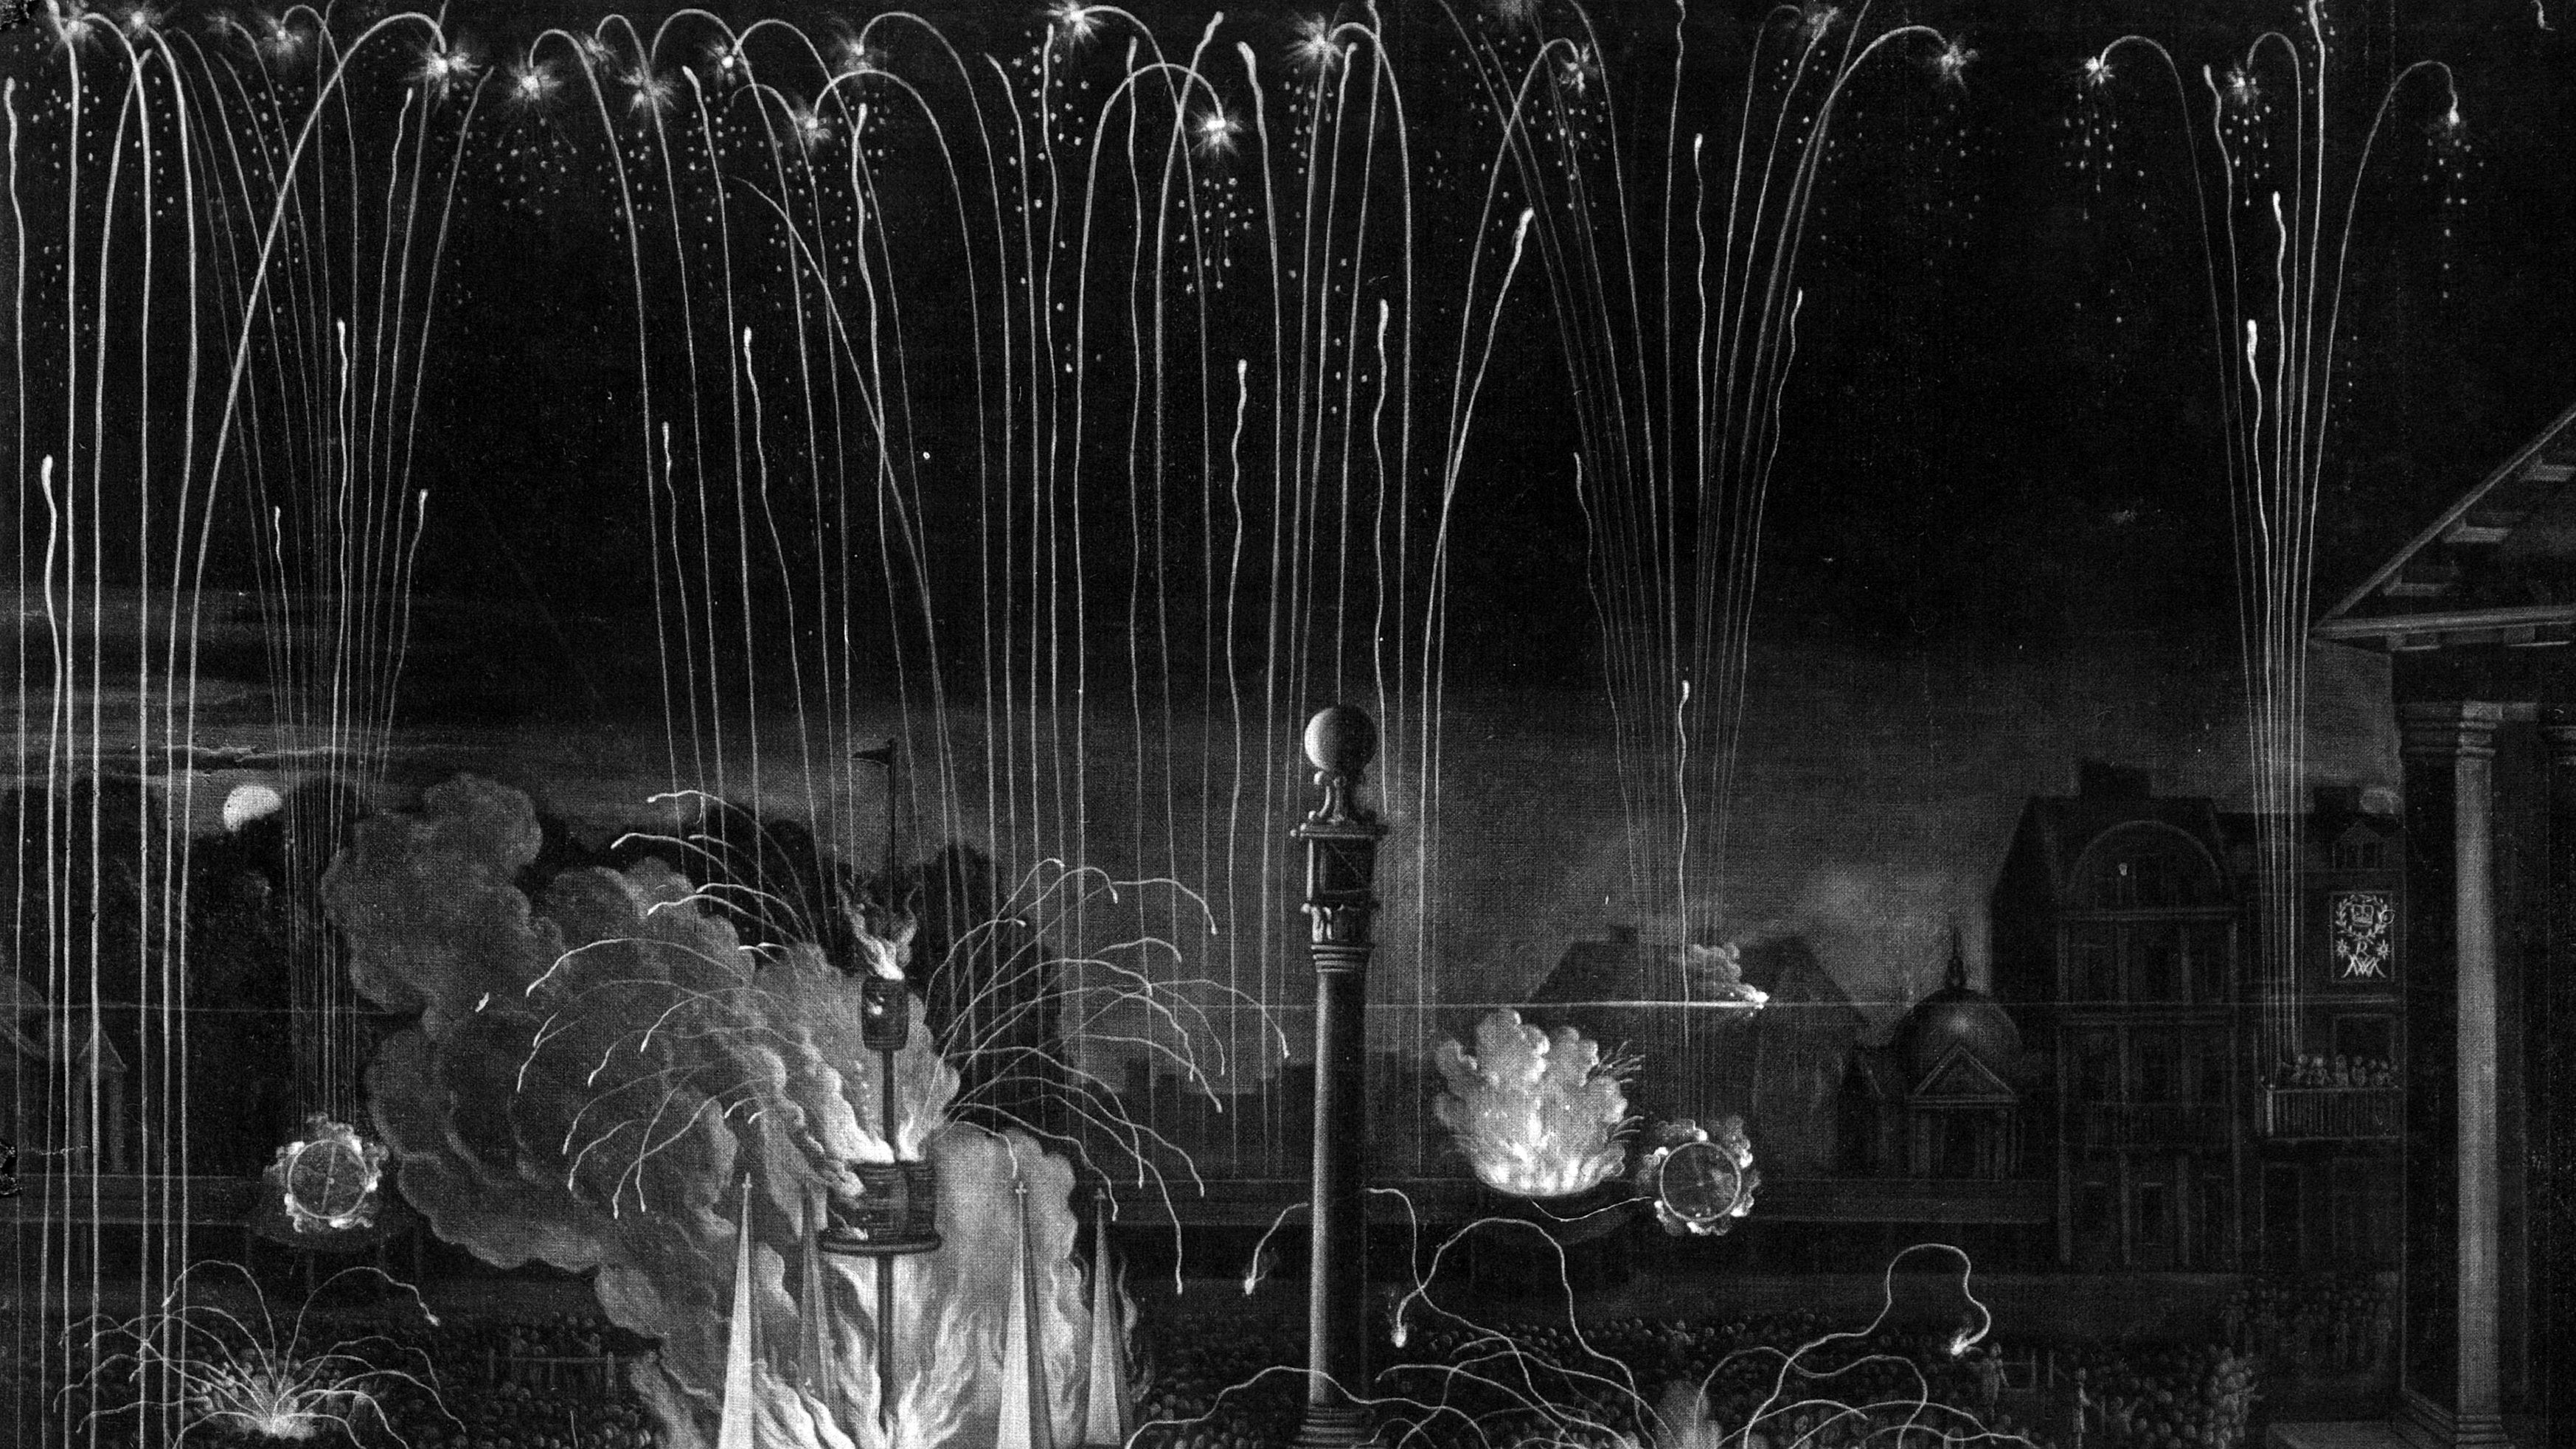 A fireworks display in an illustration from The BL King’s Topographical Collection.